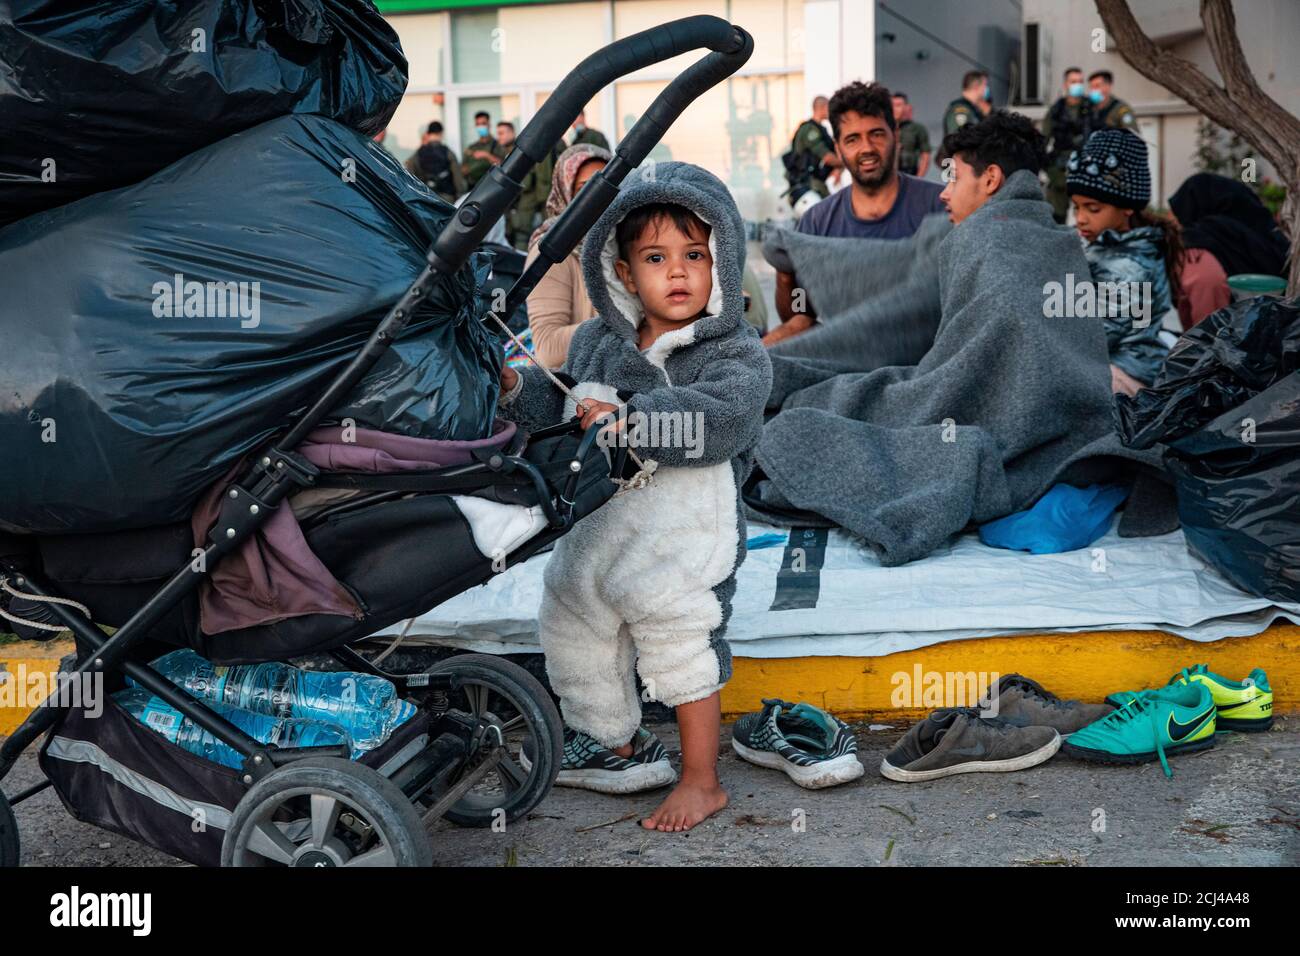 Little children are among the refugees sleeping on roadside after Moria fire.More than 13,000 Asylum seekers  flee fire at Greece's largest migrant Moira camp at lesbos. They have been stranded on the street before the town of mitilini and prevented to enter the harbour by police. Stock Photo